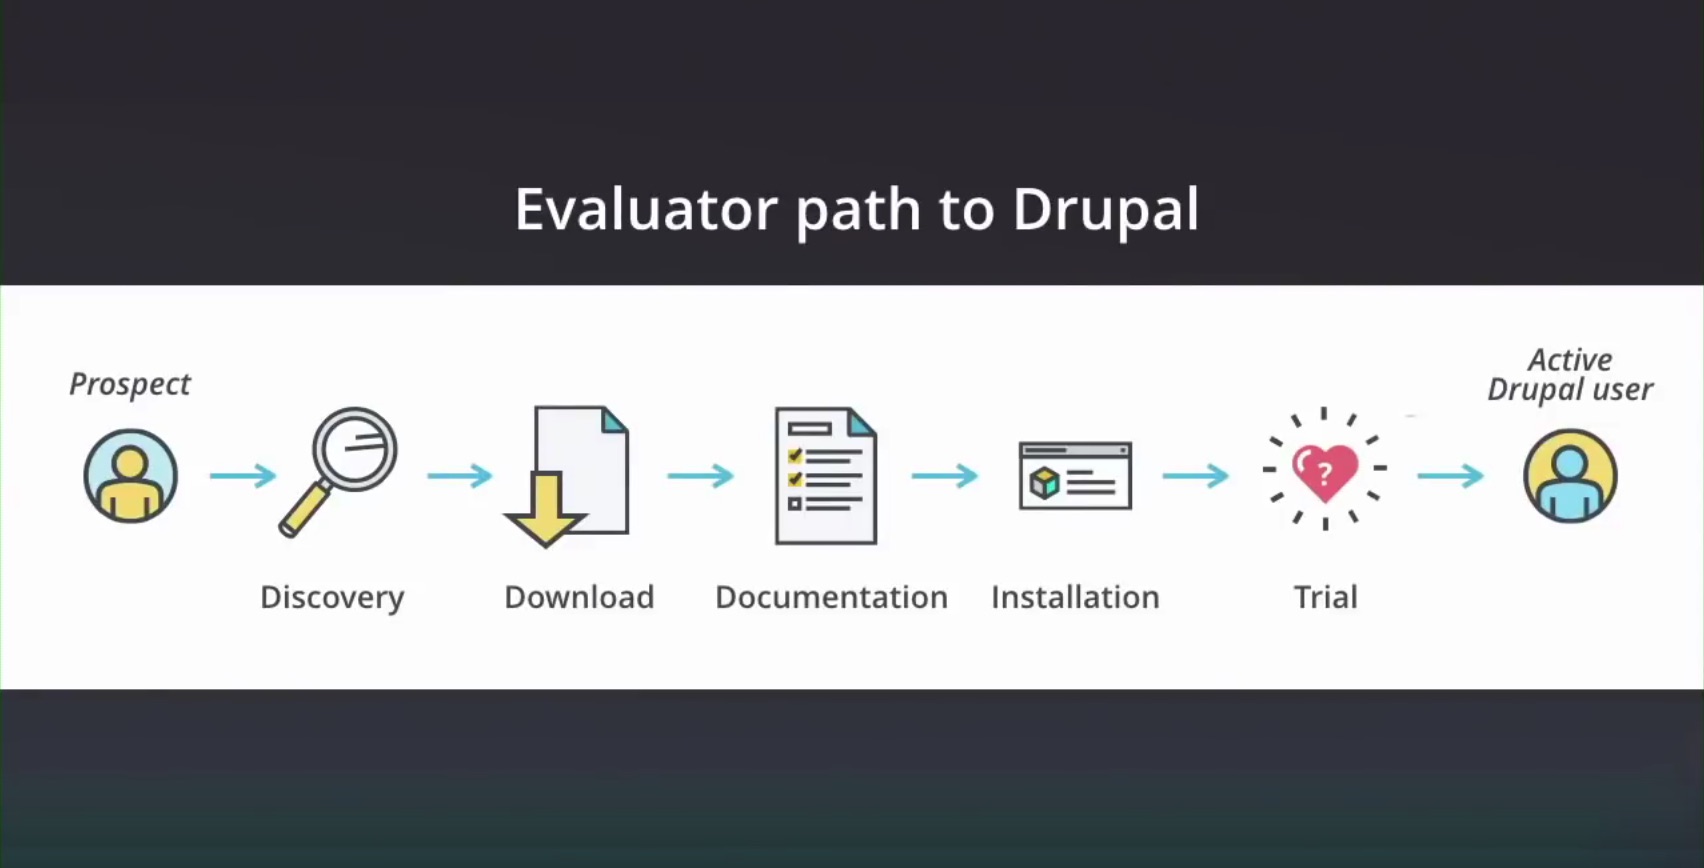 Evaluator Path to Drupal: Prospect > Discovery > Download > Documentation > Installation > Trial > Active Drupal User